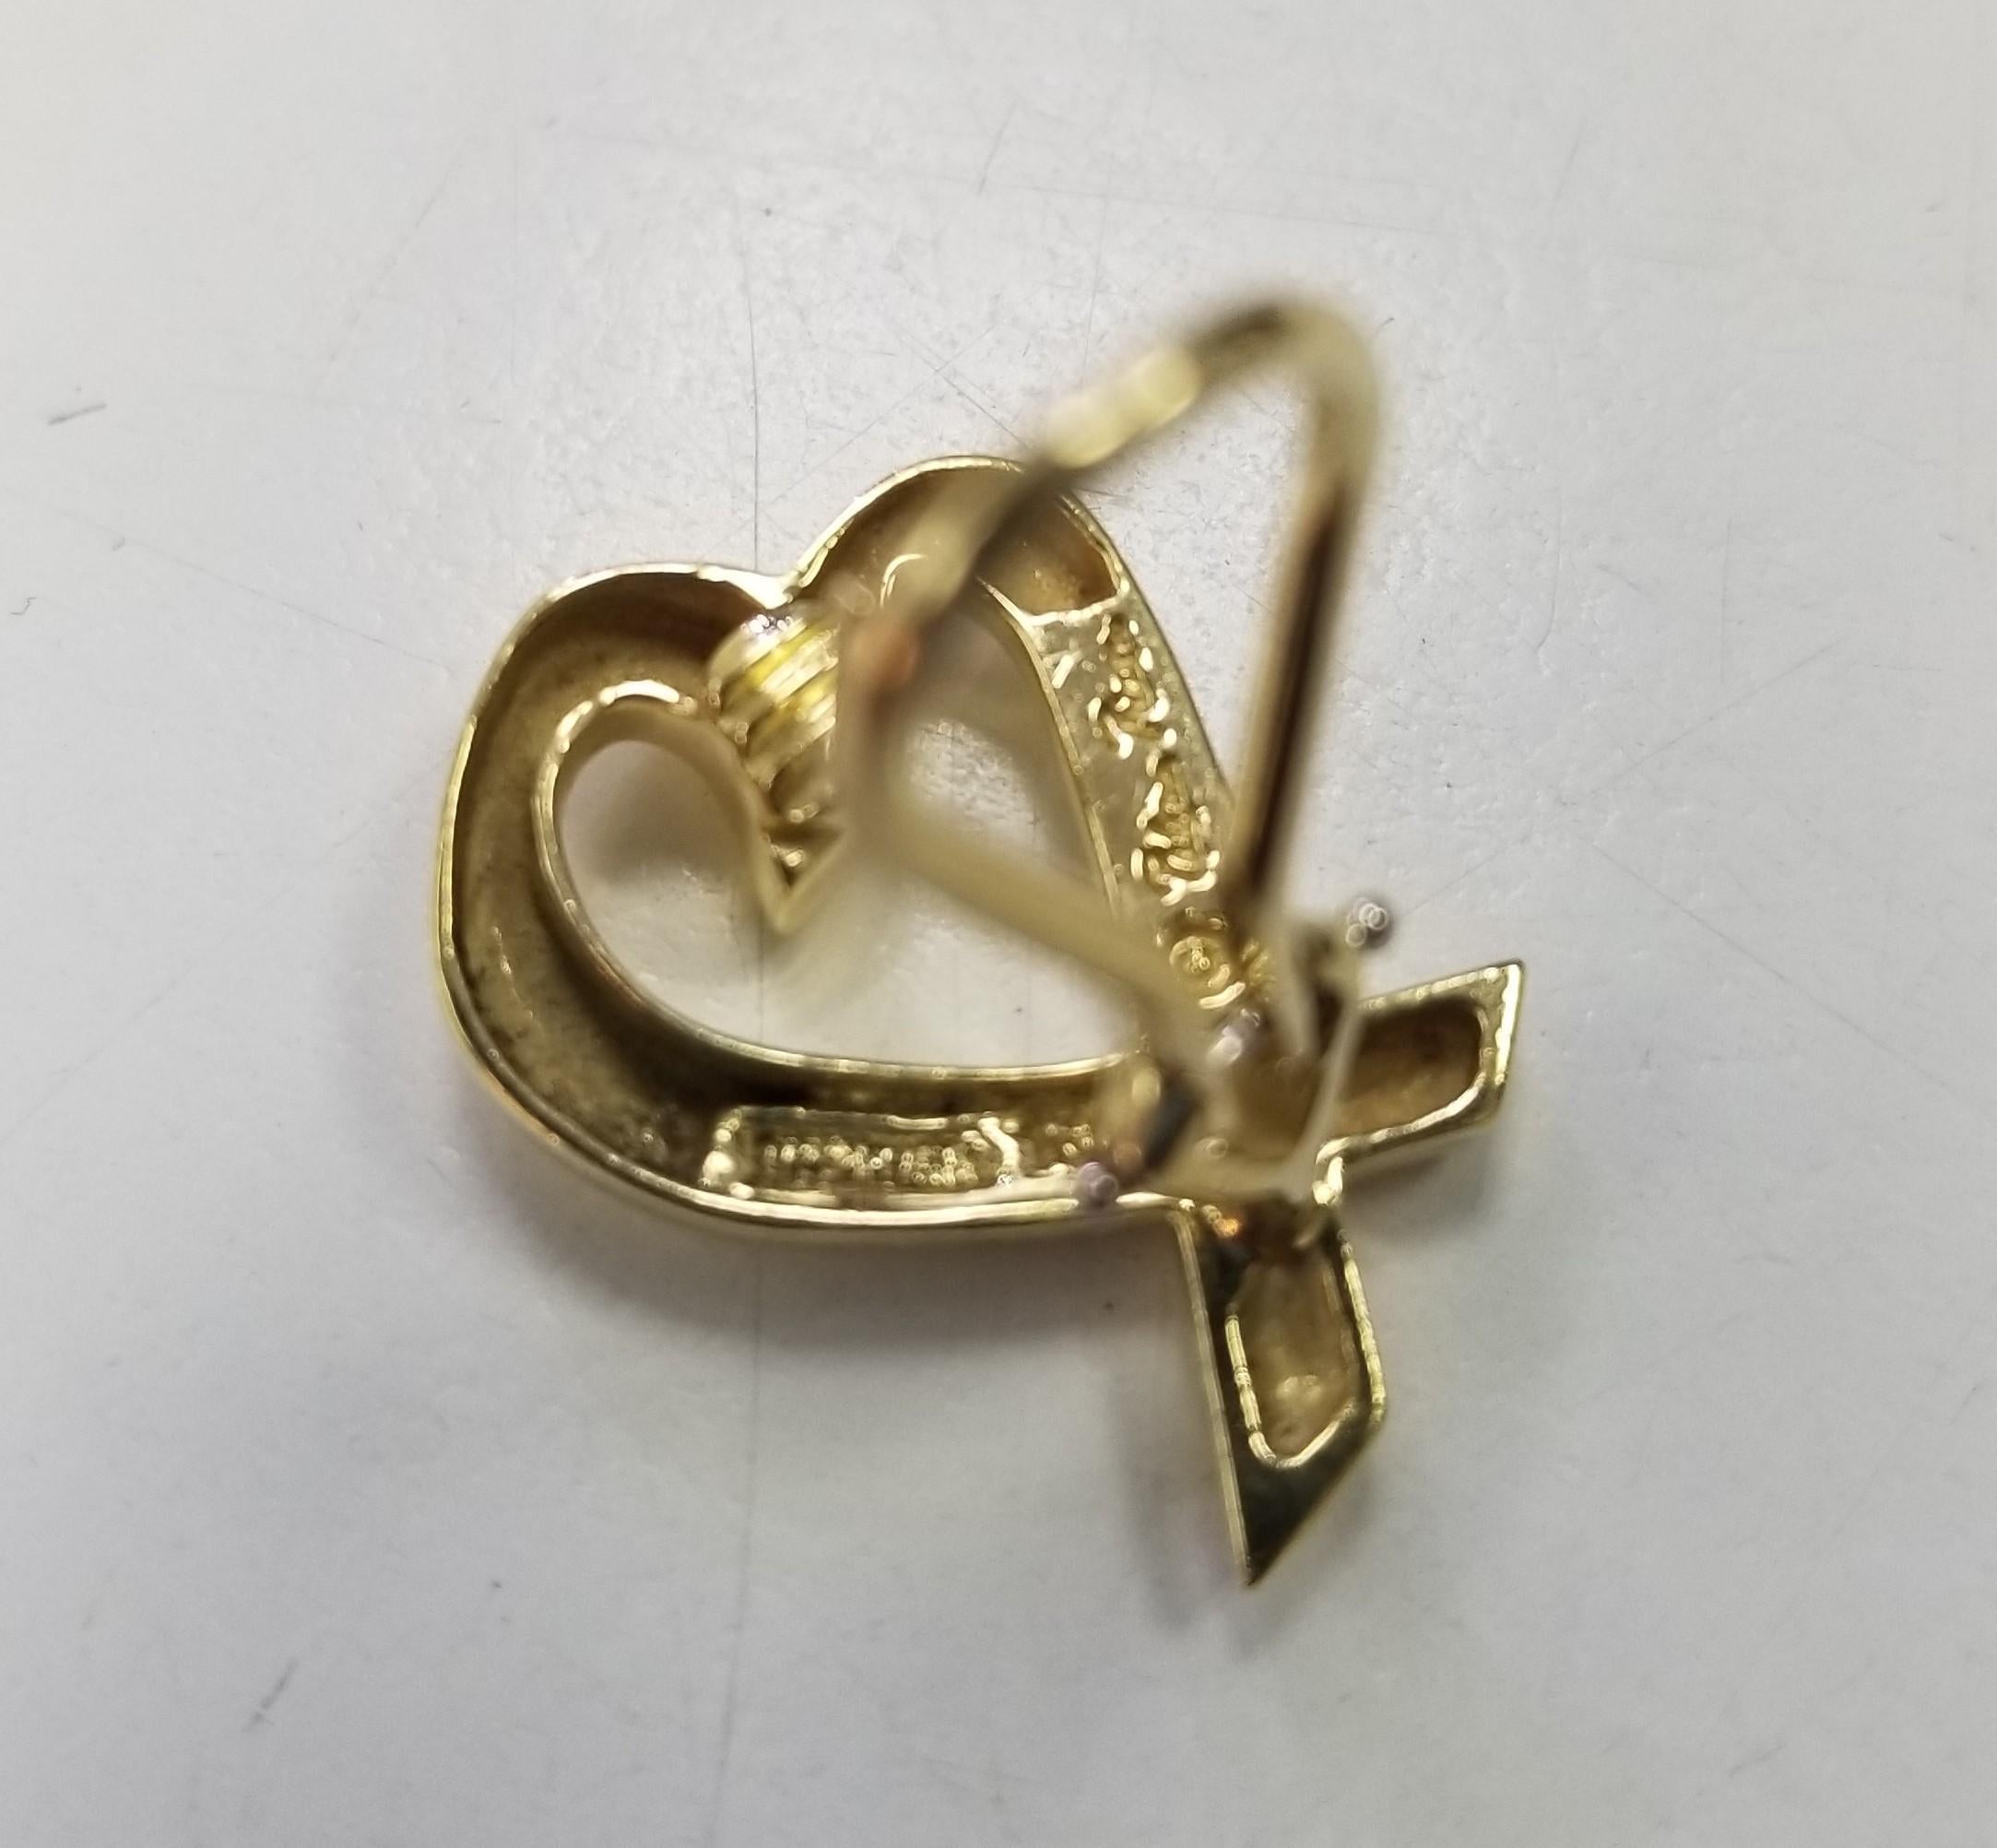 Tiffany & Co. Paloma Picasso 18k Gold Loving Heart Lever Back Earrings In Excellent Condition For Sale In Los Angeles, CA